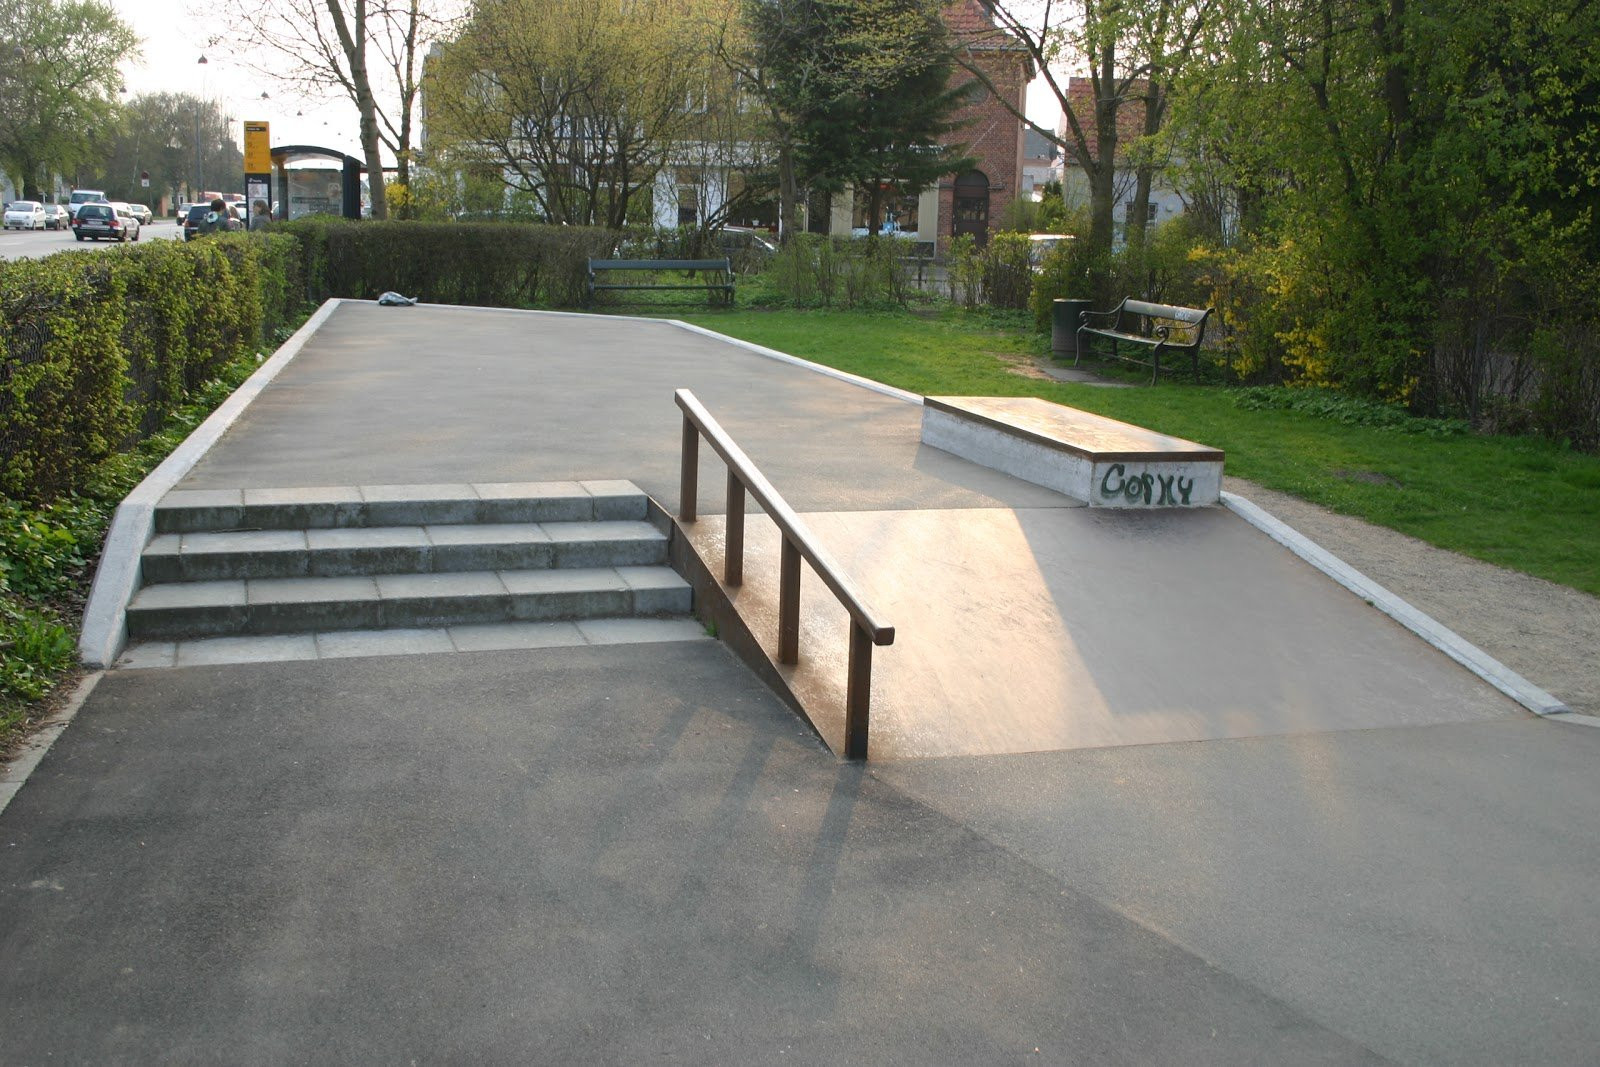 Vanløse skatepark was built in 2010, so it is relatively new. It is a small park with several obstacles. The park is a good place for beginners as all the obstacles are low. The park is oblong and lies on Jyllingevej. The shape of the park makes it easy to skate in one single line from one end to the other. The park is worth a visit for a short session, however not if you have to travel far to get there.The park also has a small playground for children. This means that there are often families with small children. It is important to show consideration for them.